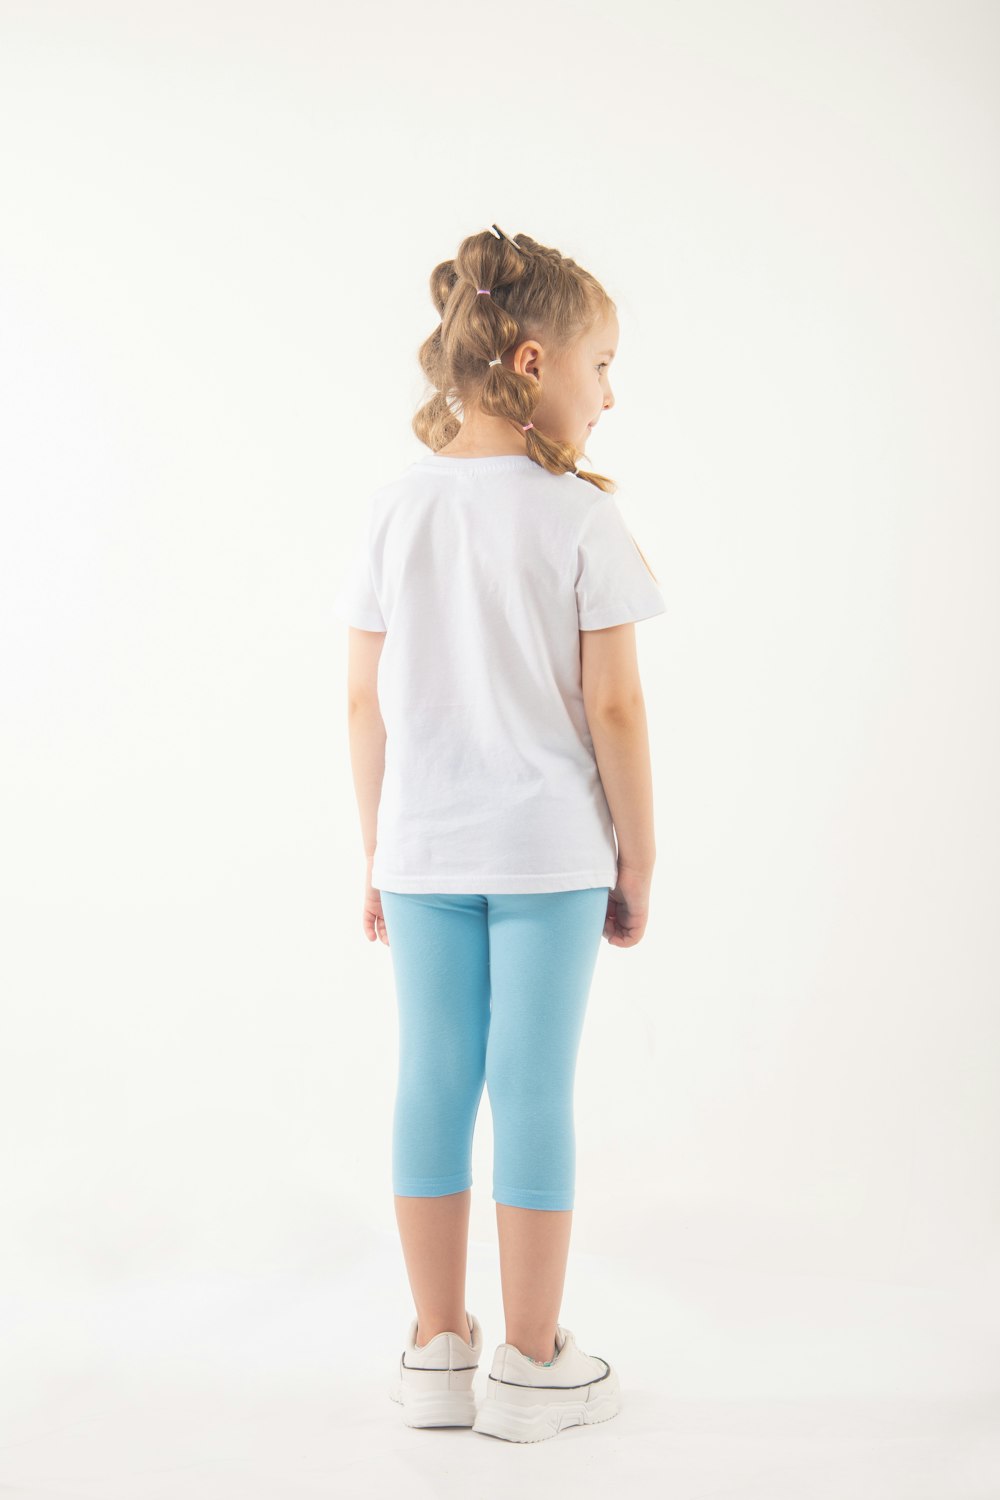 a little girl wearing blue leggings and a white t - shirt